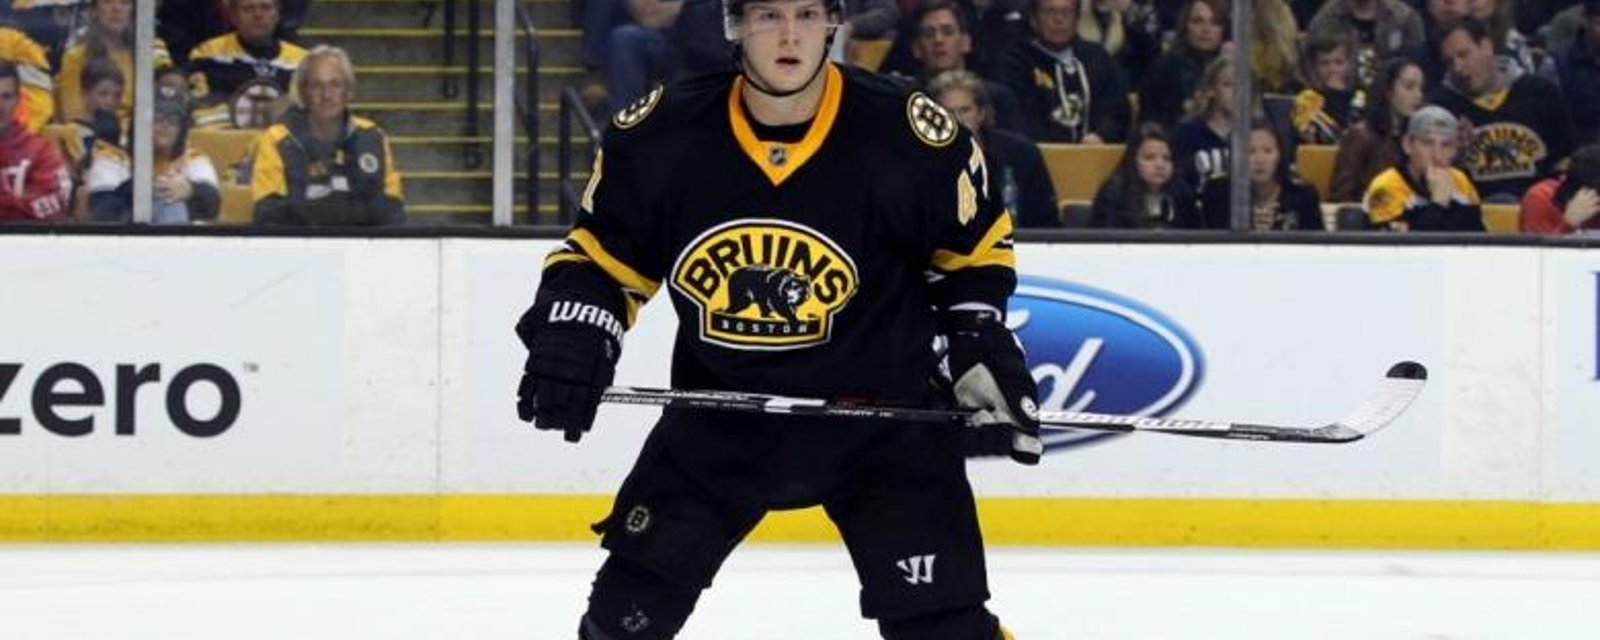 Torey Krug shows no fear and drops the gloves with a much bigger man.